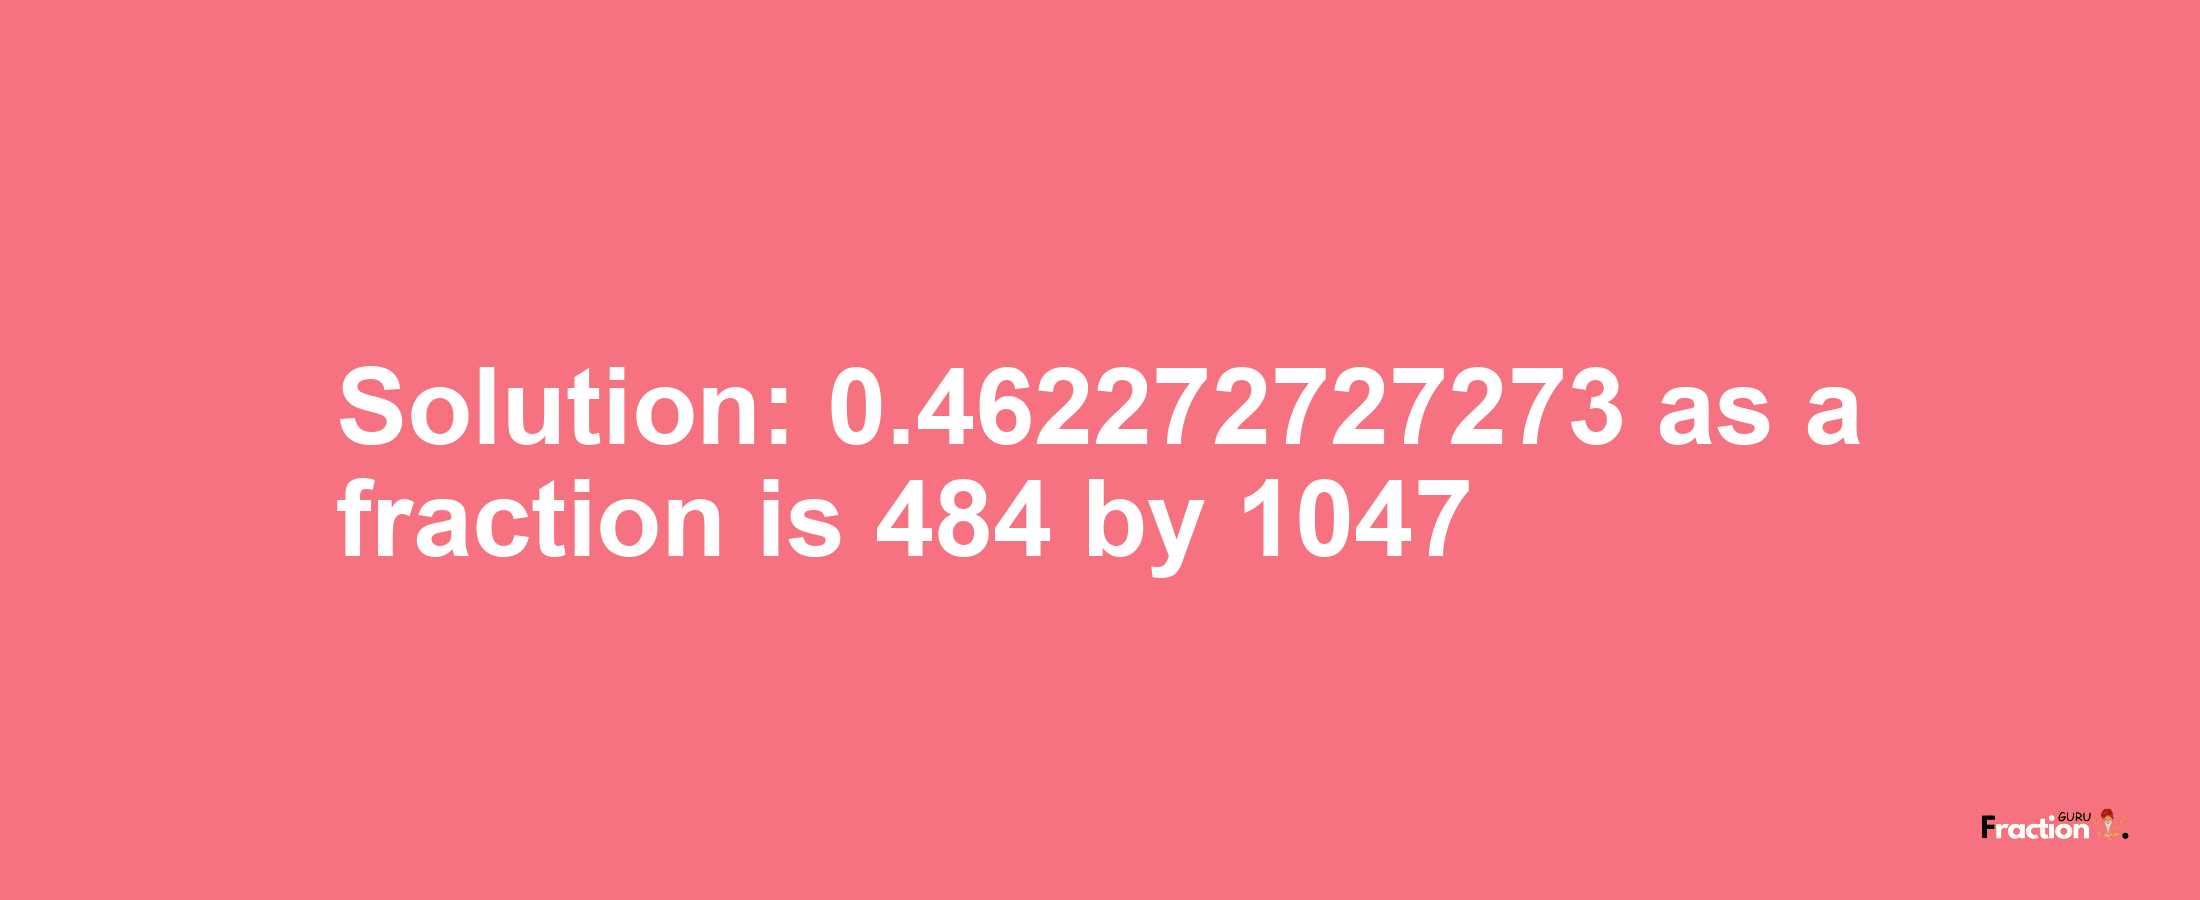 Solution:0.462272727273 as a fraction is 484/1047